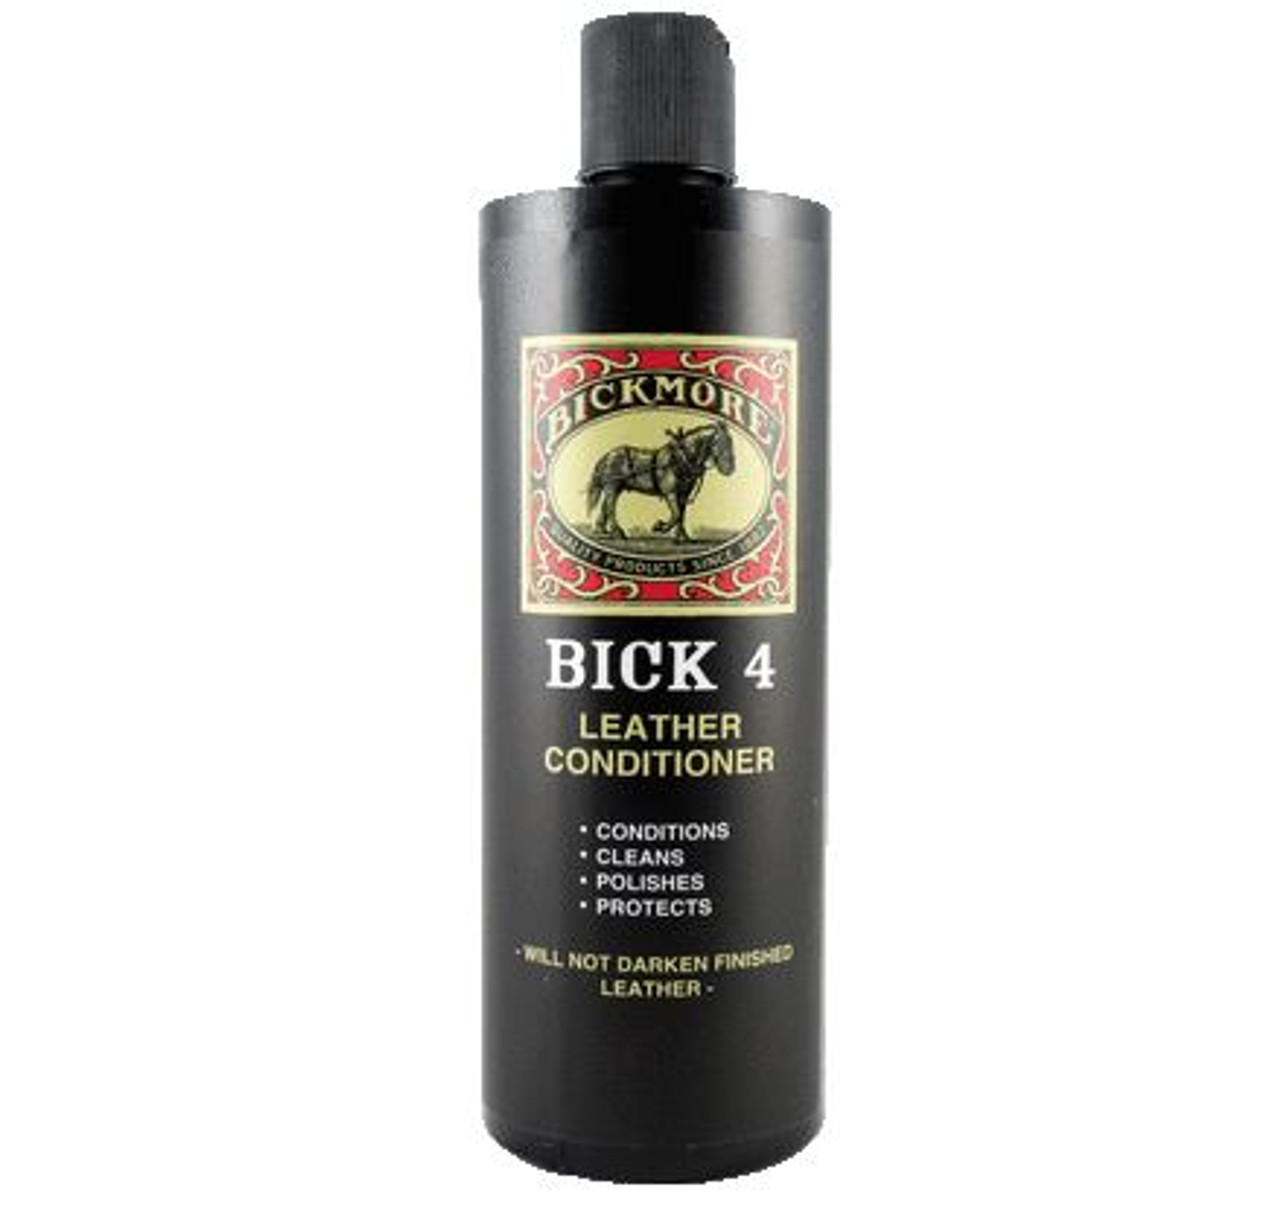 Bick 4 Leather Conditioner and Leather Cleaner 2 oz - Will Not Darken  Leather